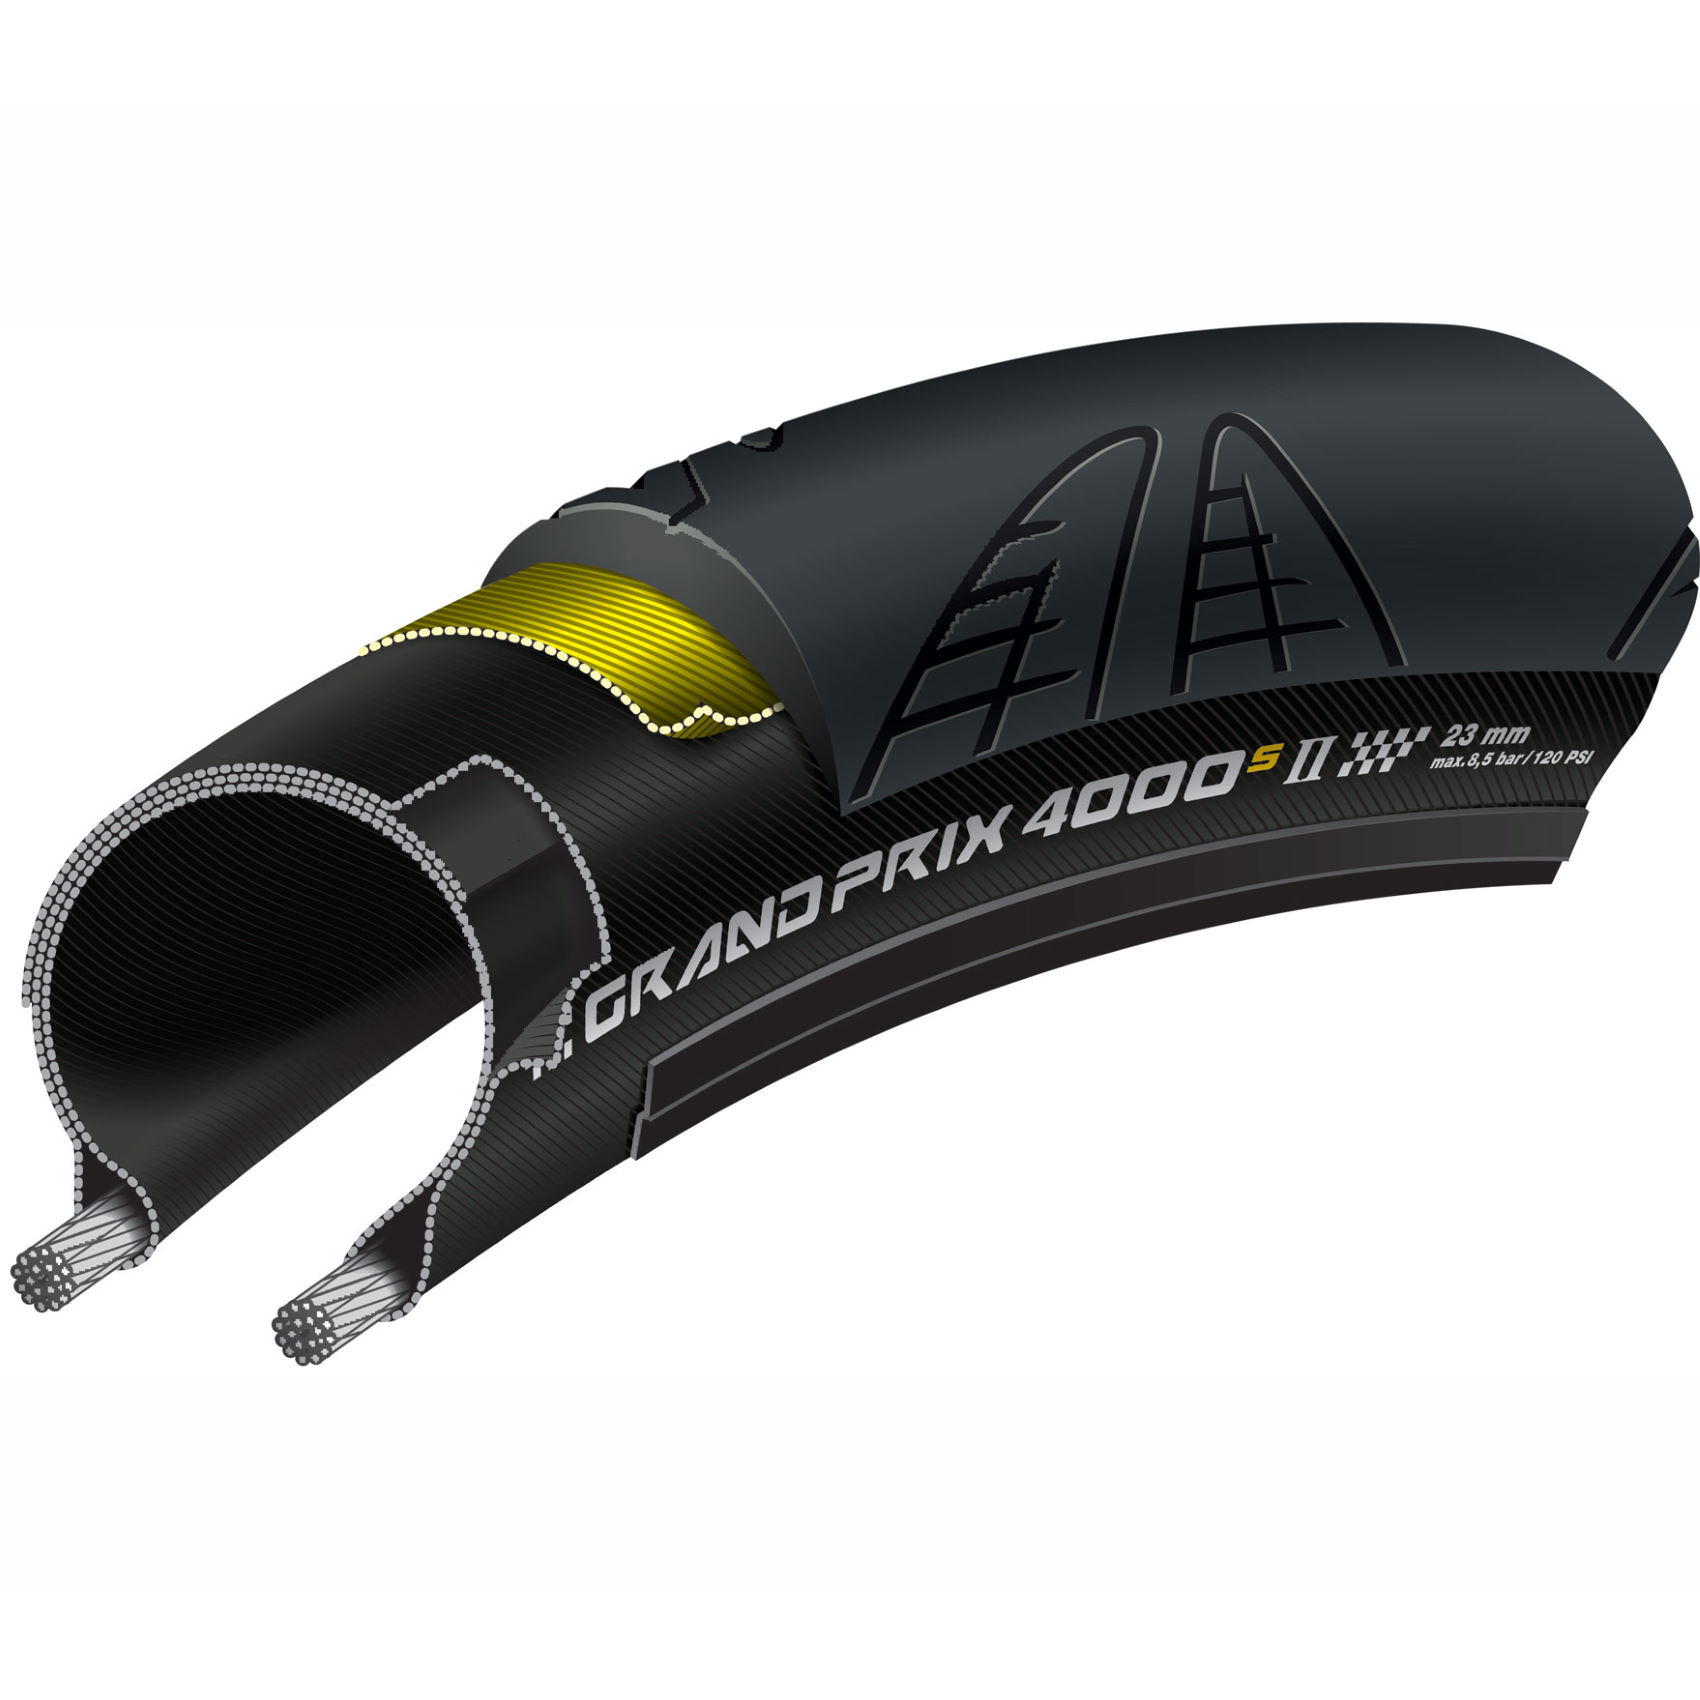 Continental-4000S-II-Road-Tyre-Road-Race-Tyres-Black-Black-CONTI-0100935